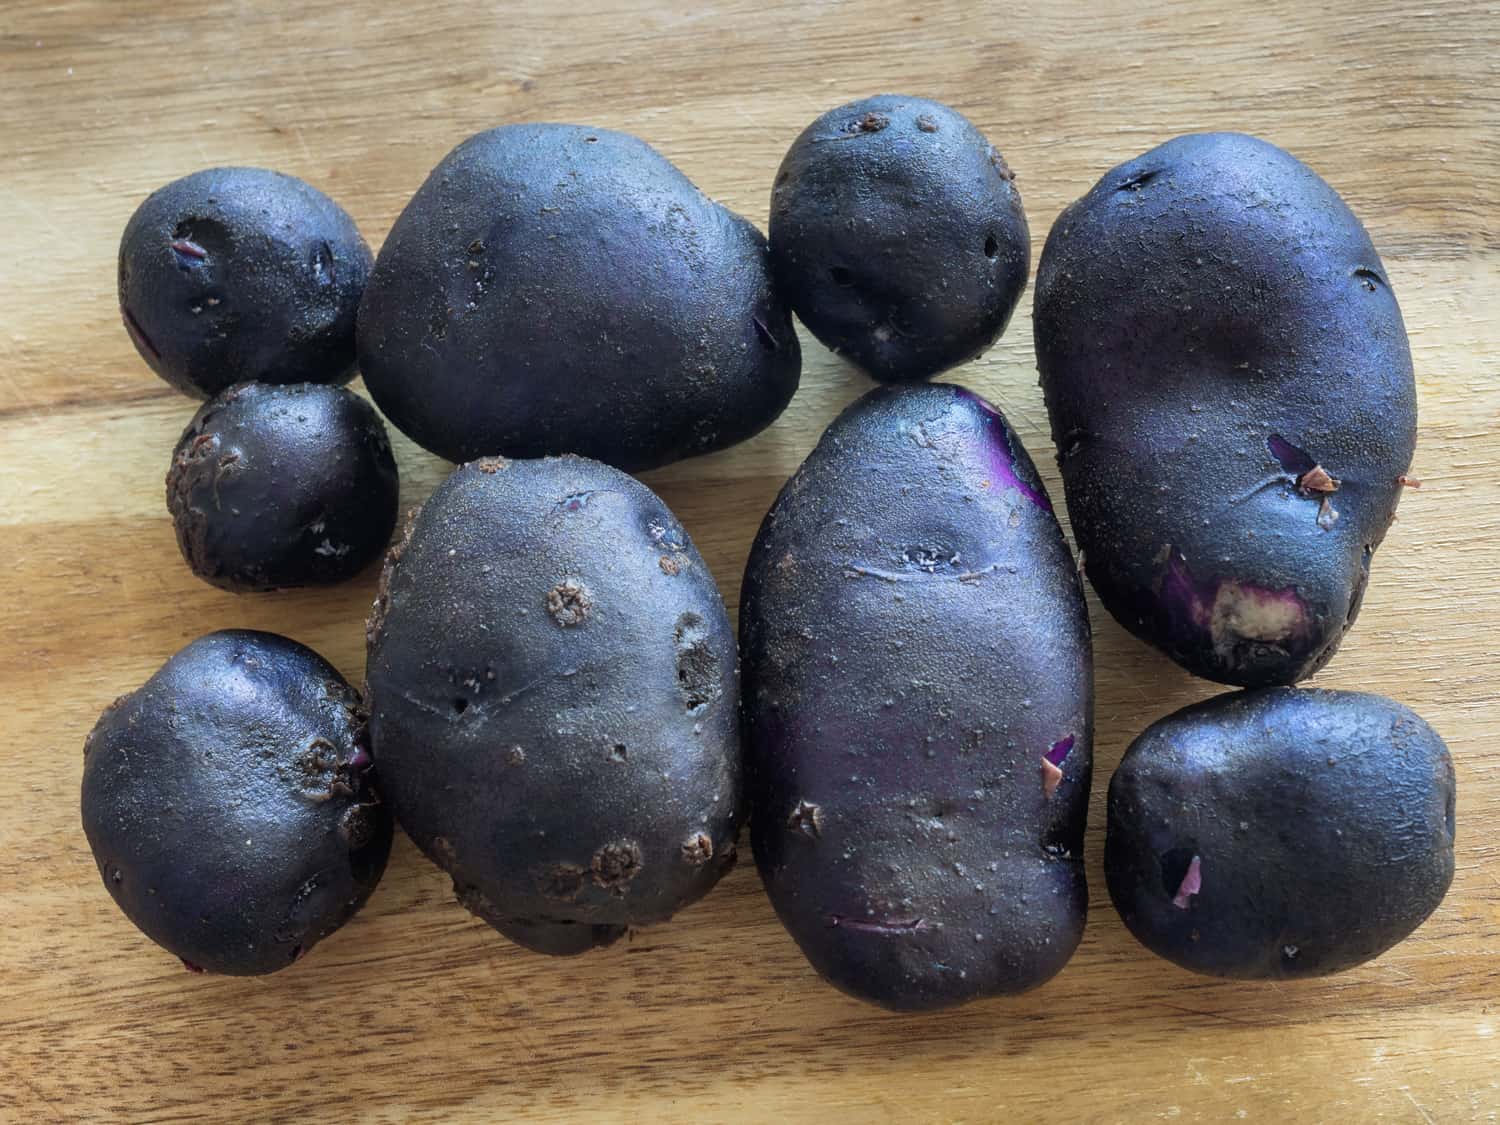 Blue potatoes all fresh from the garden